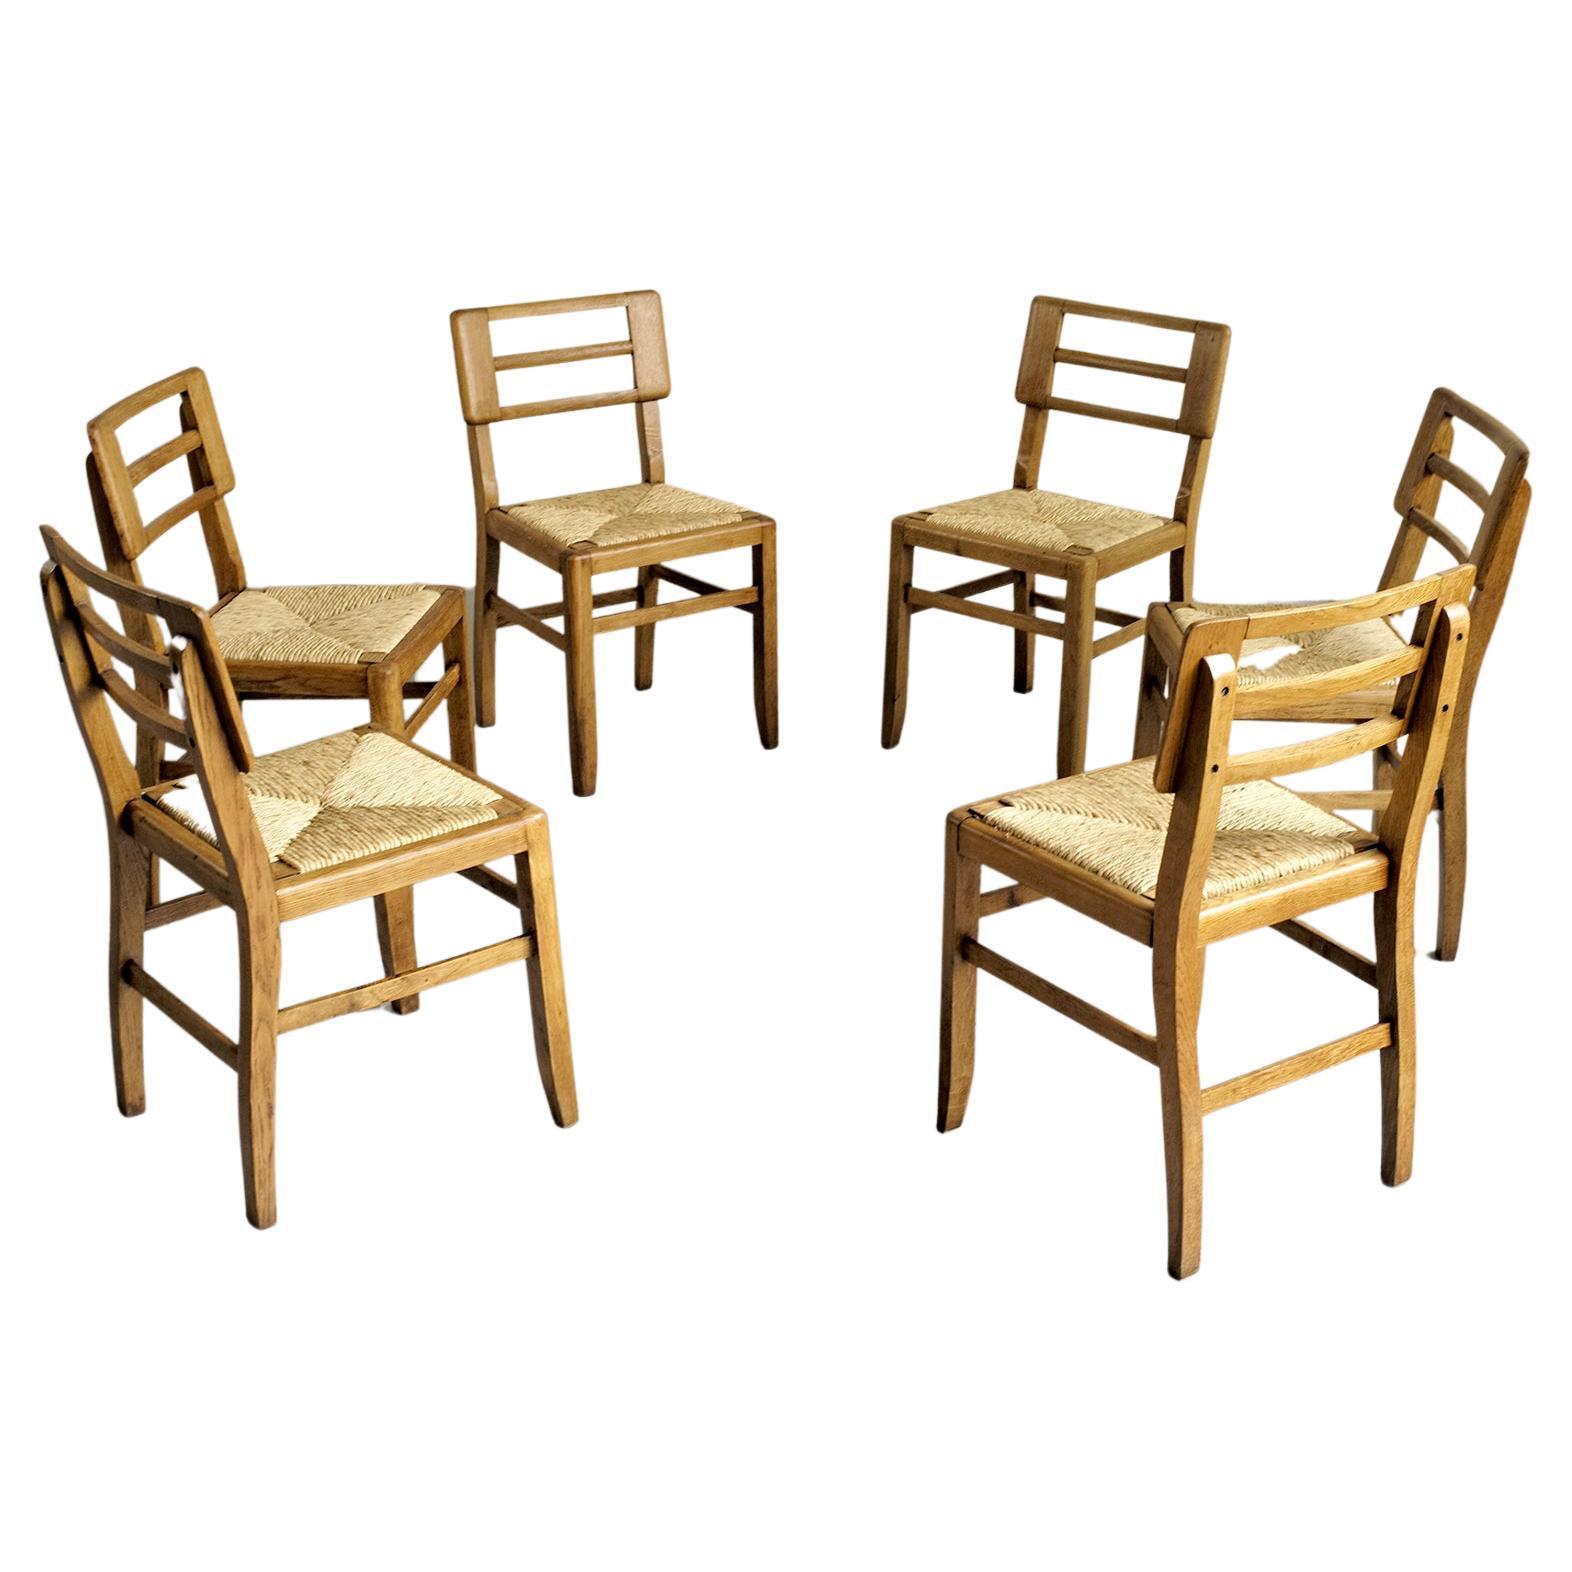 Pierre Cruège, Set of 6 Straw Chairs, France, 1950 For Sale